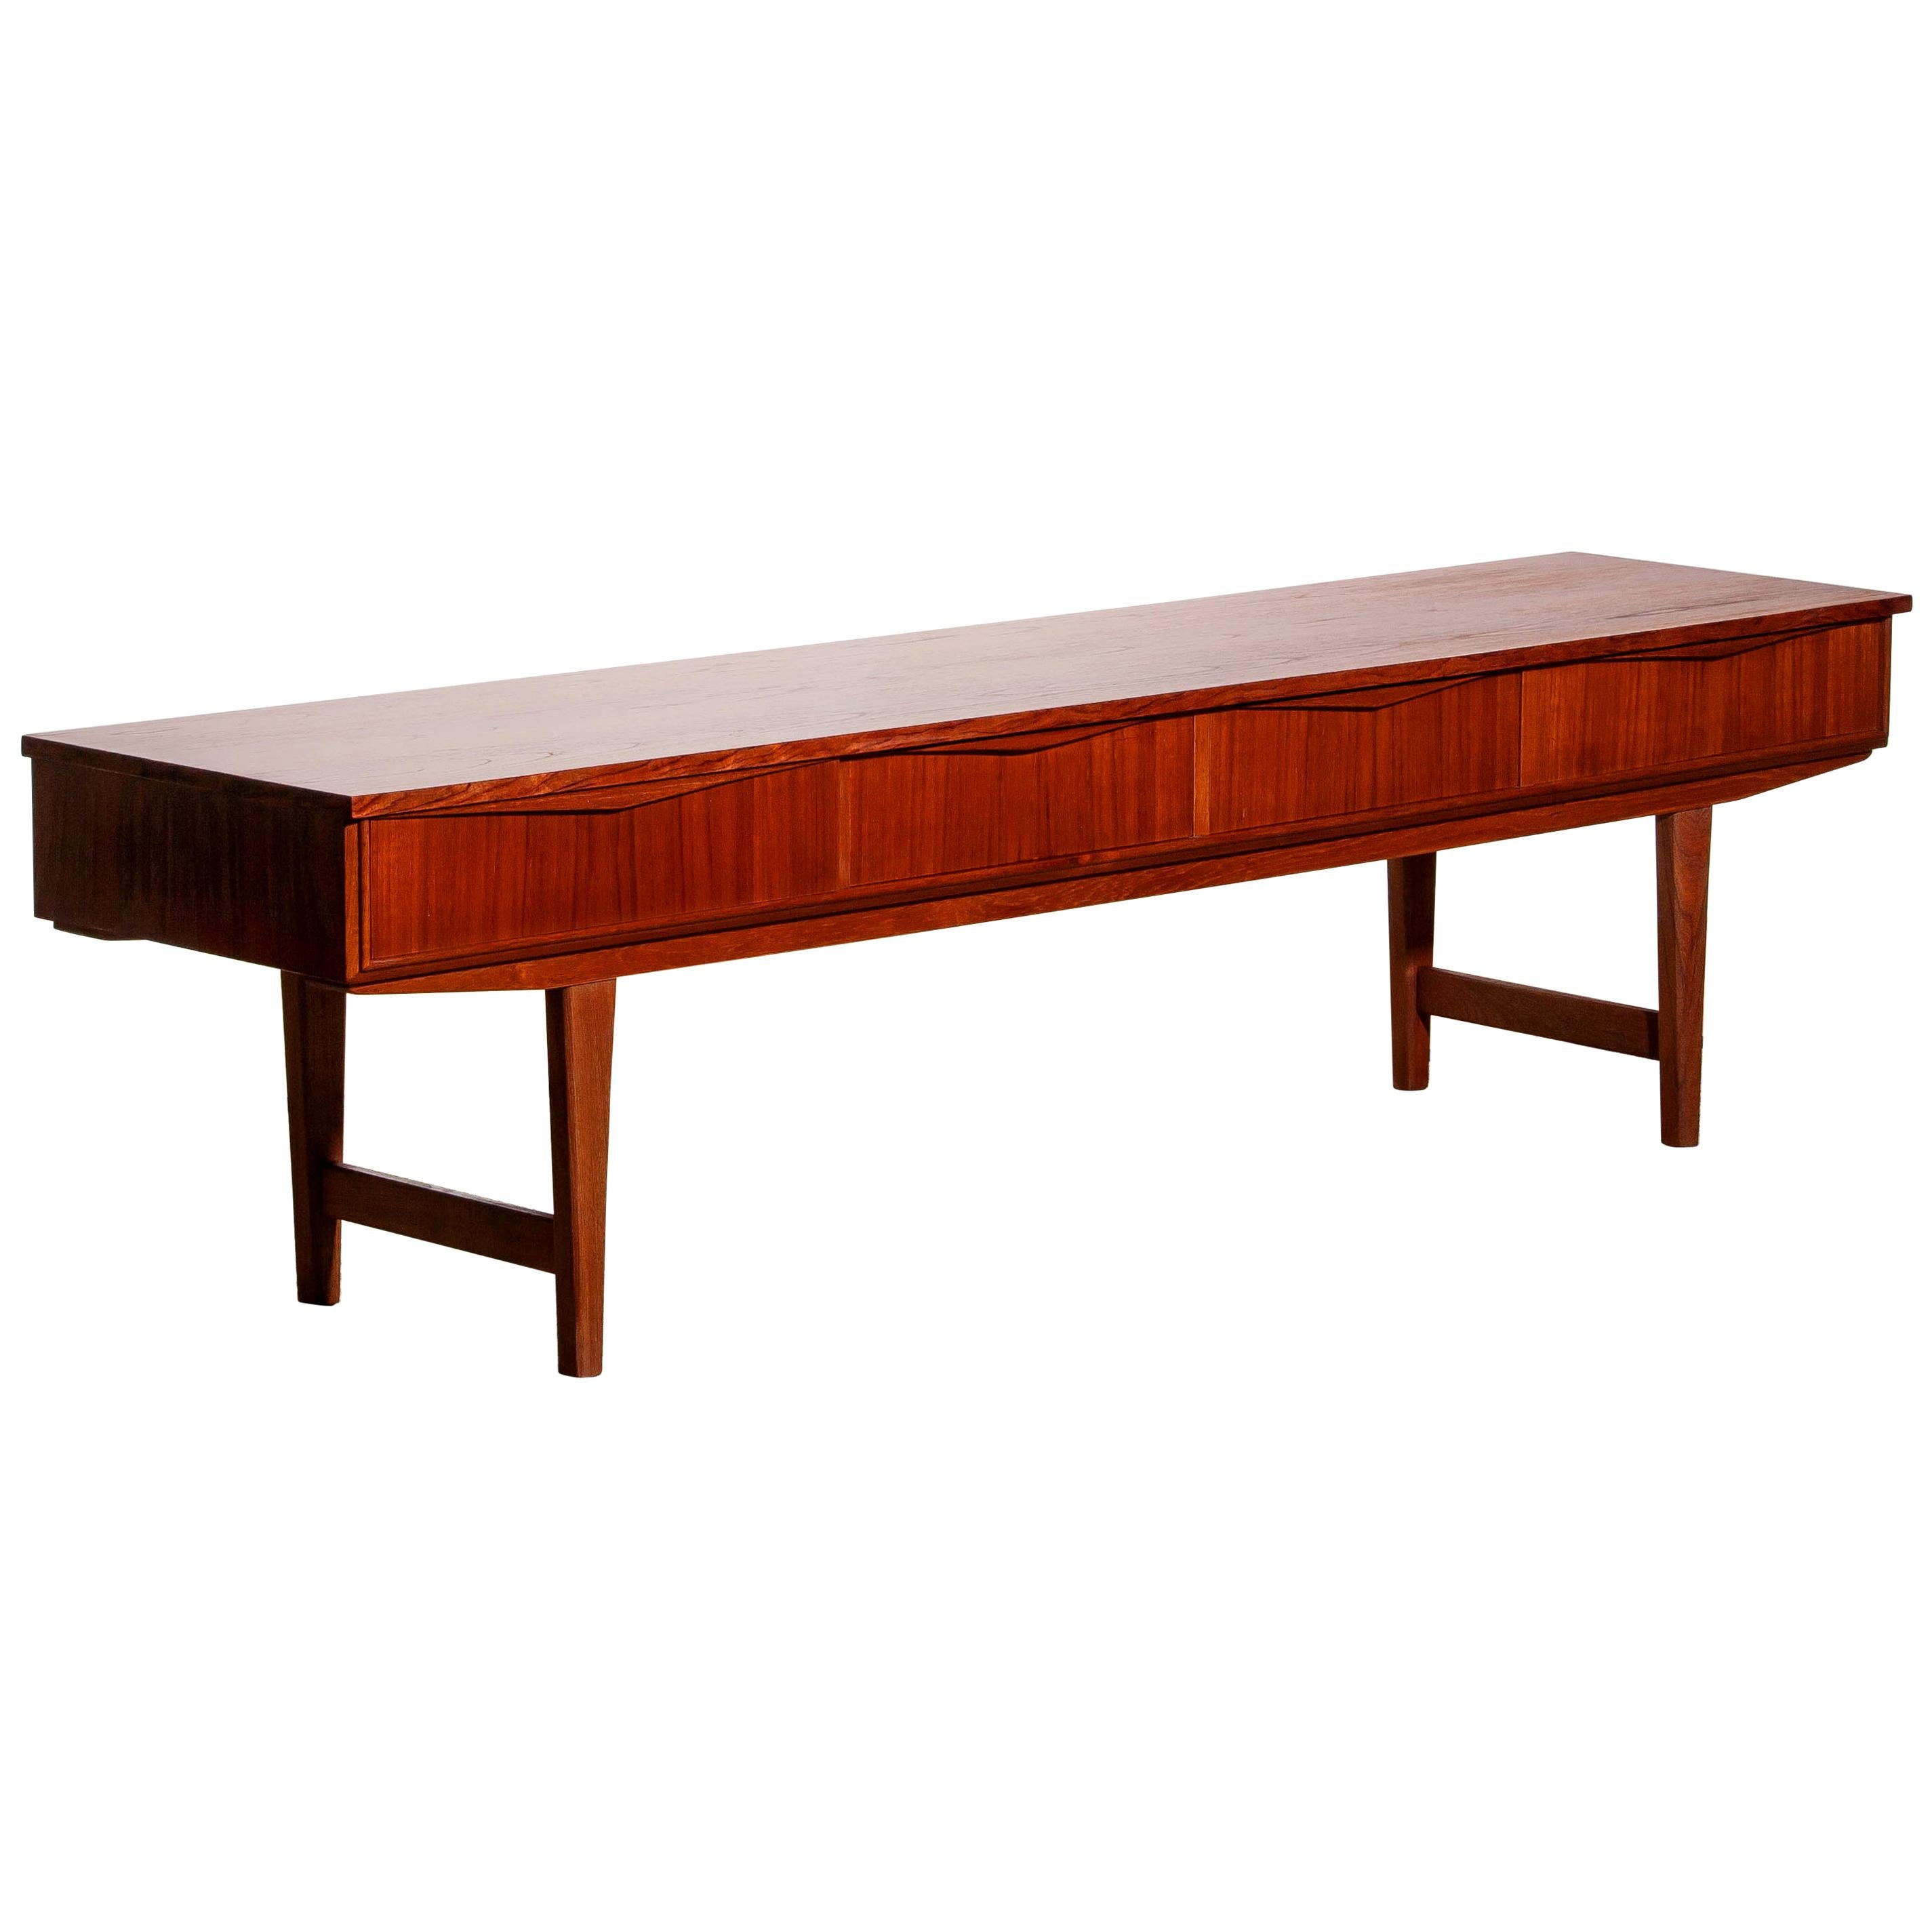 This extremely rare and slim sideboard by E. W. Bach for Sejling Skabe in beautiful teak with four dovetailed drawers is in very good condition with her beautiful tall tapered legs this credenza is an absolute master piece.
The overall condition is